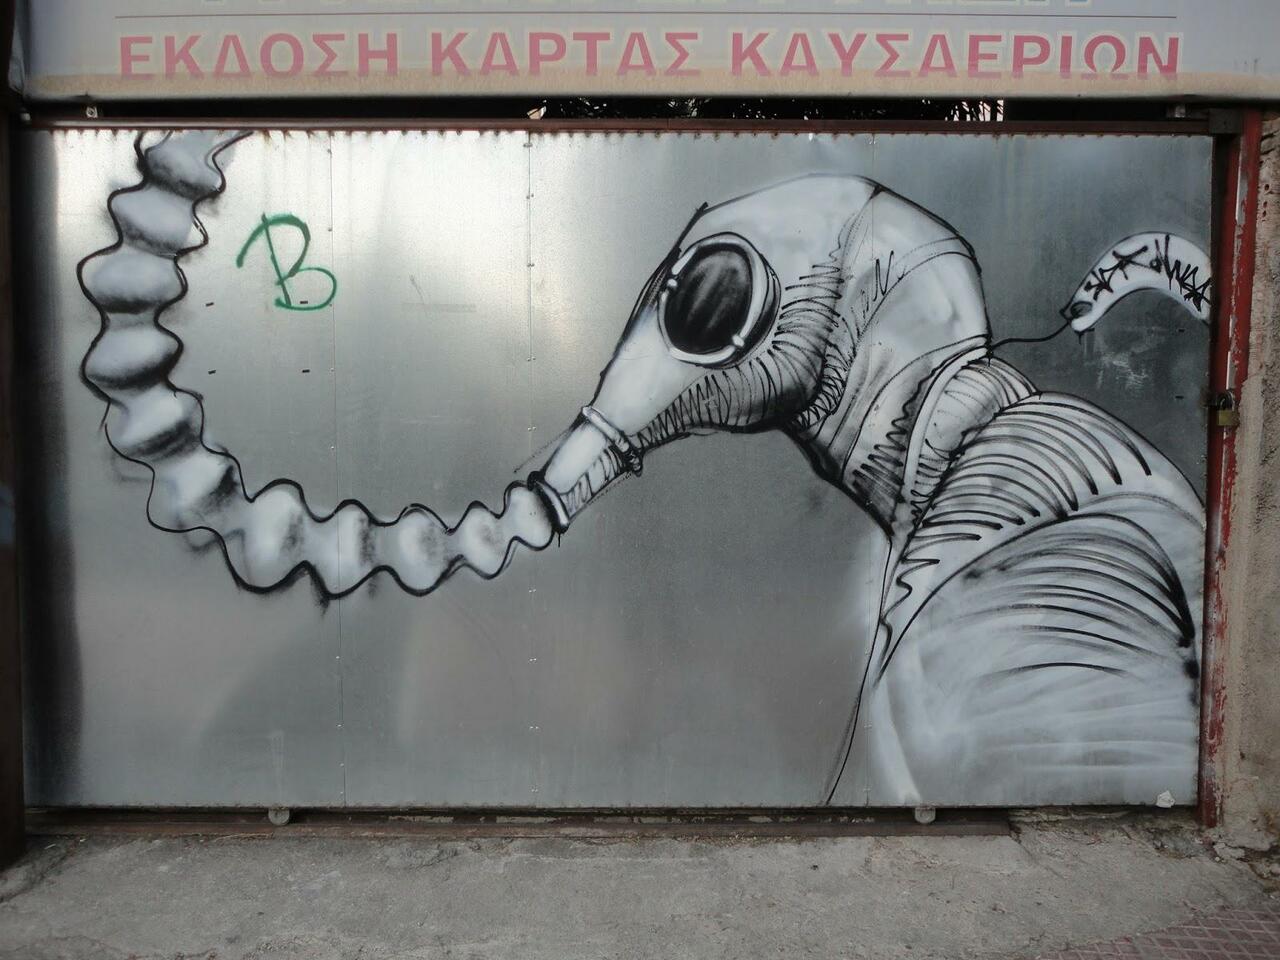 Once upon a time in #Athens, #20 http://bit.ly/1KLEHGu #streetart #graffiti #mural #antireport http://t.co/AavZ0raLhe